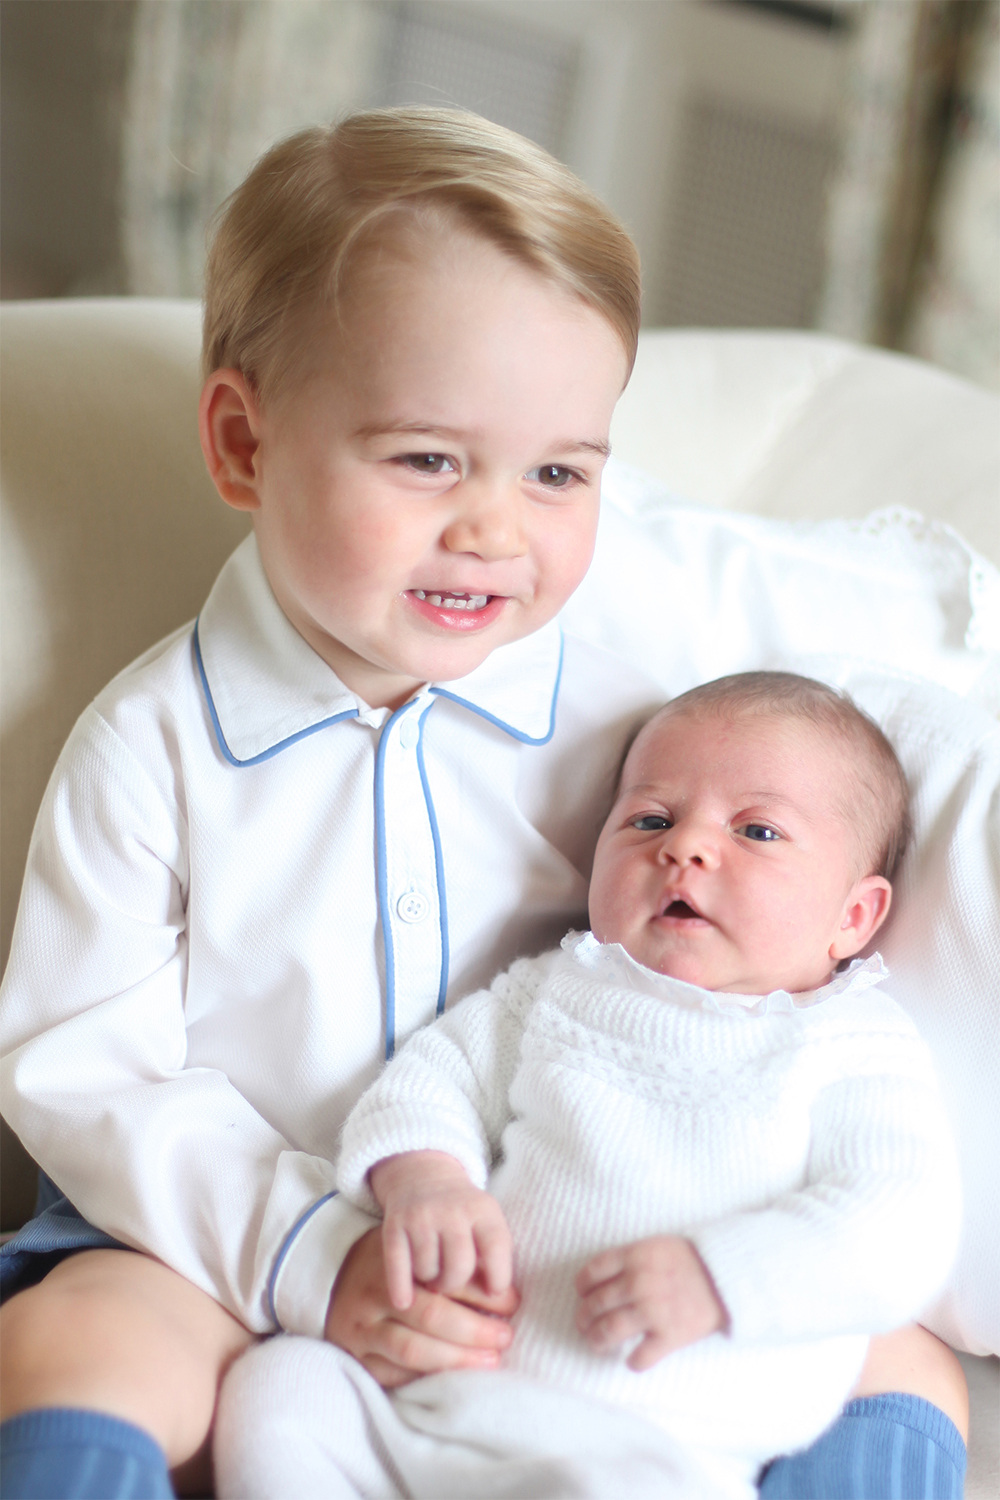 George cuddles up to his new sister, Princess Charlotte, at the family's country home in Norfolk in mid-May 2015.